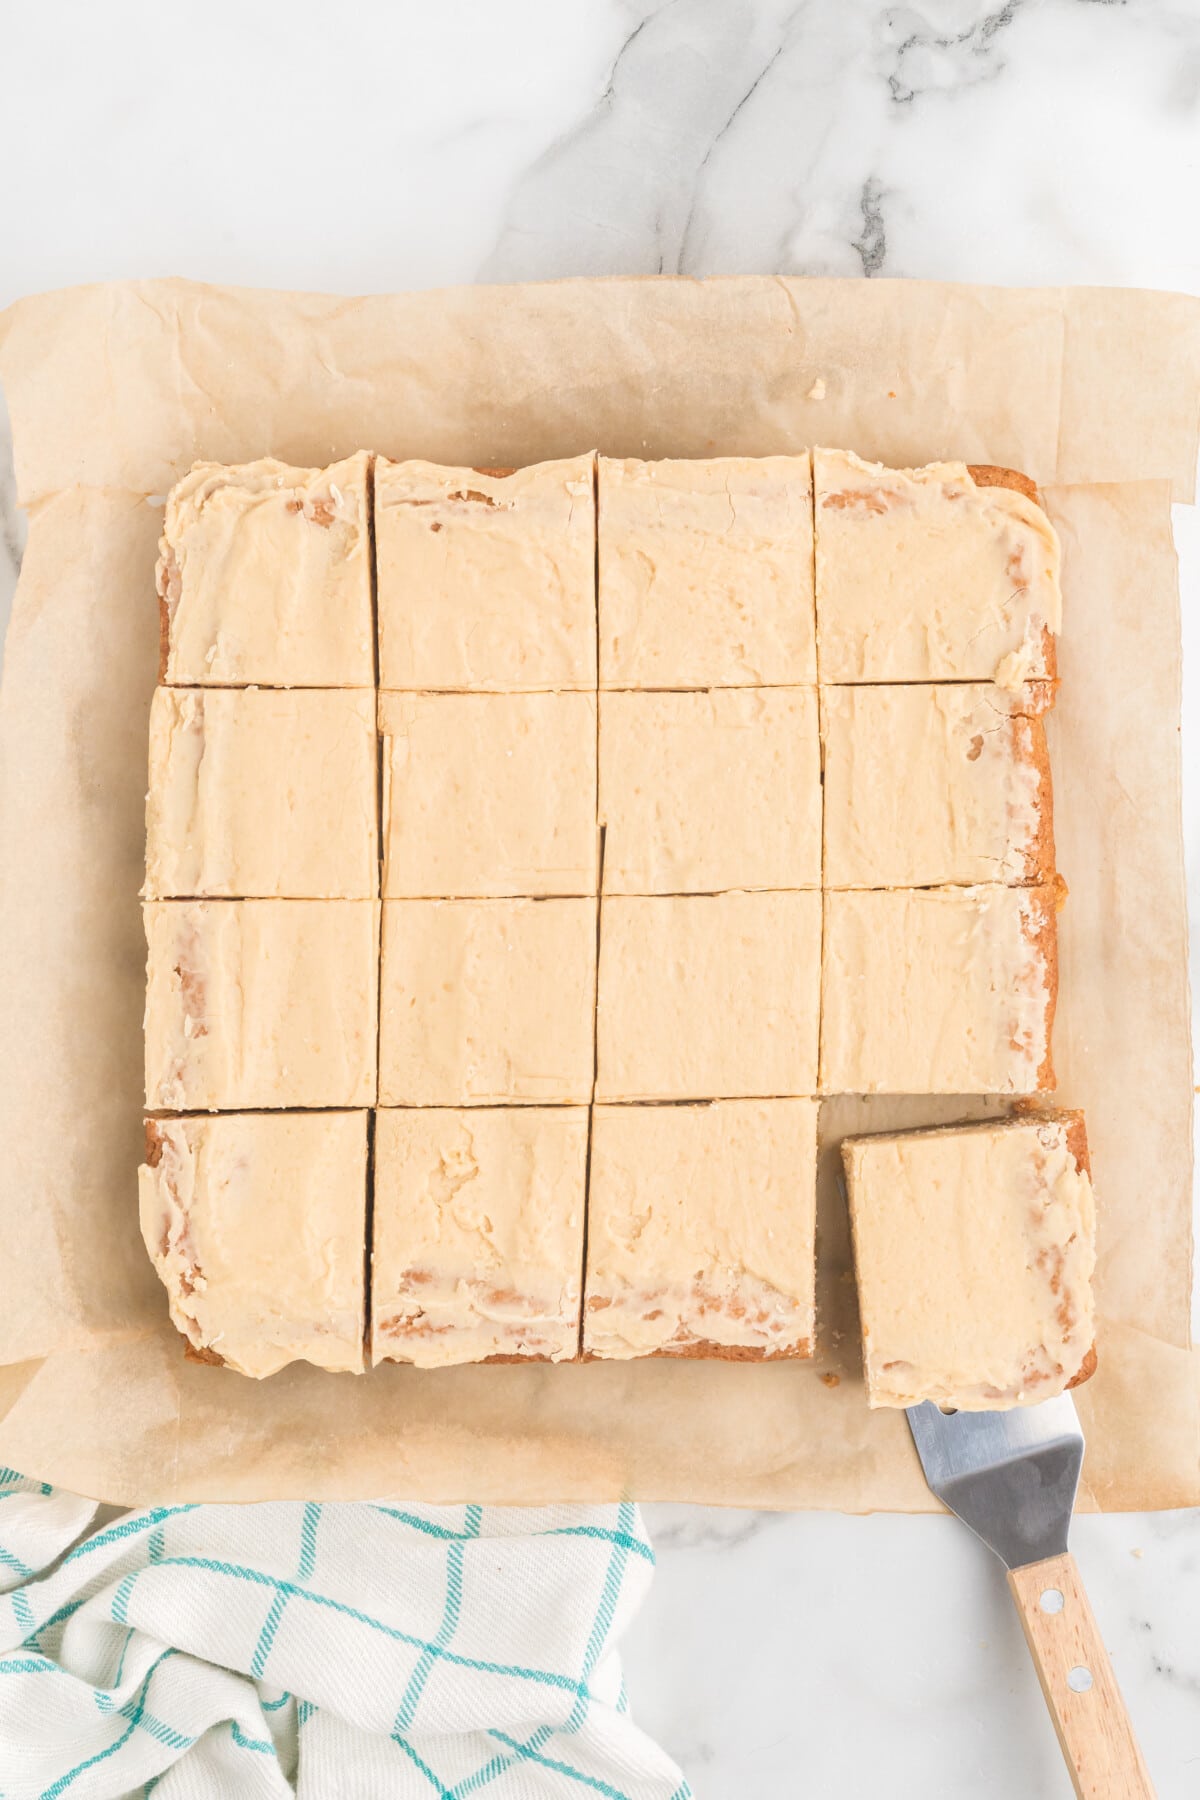 butterscotch brownies cut into squares